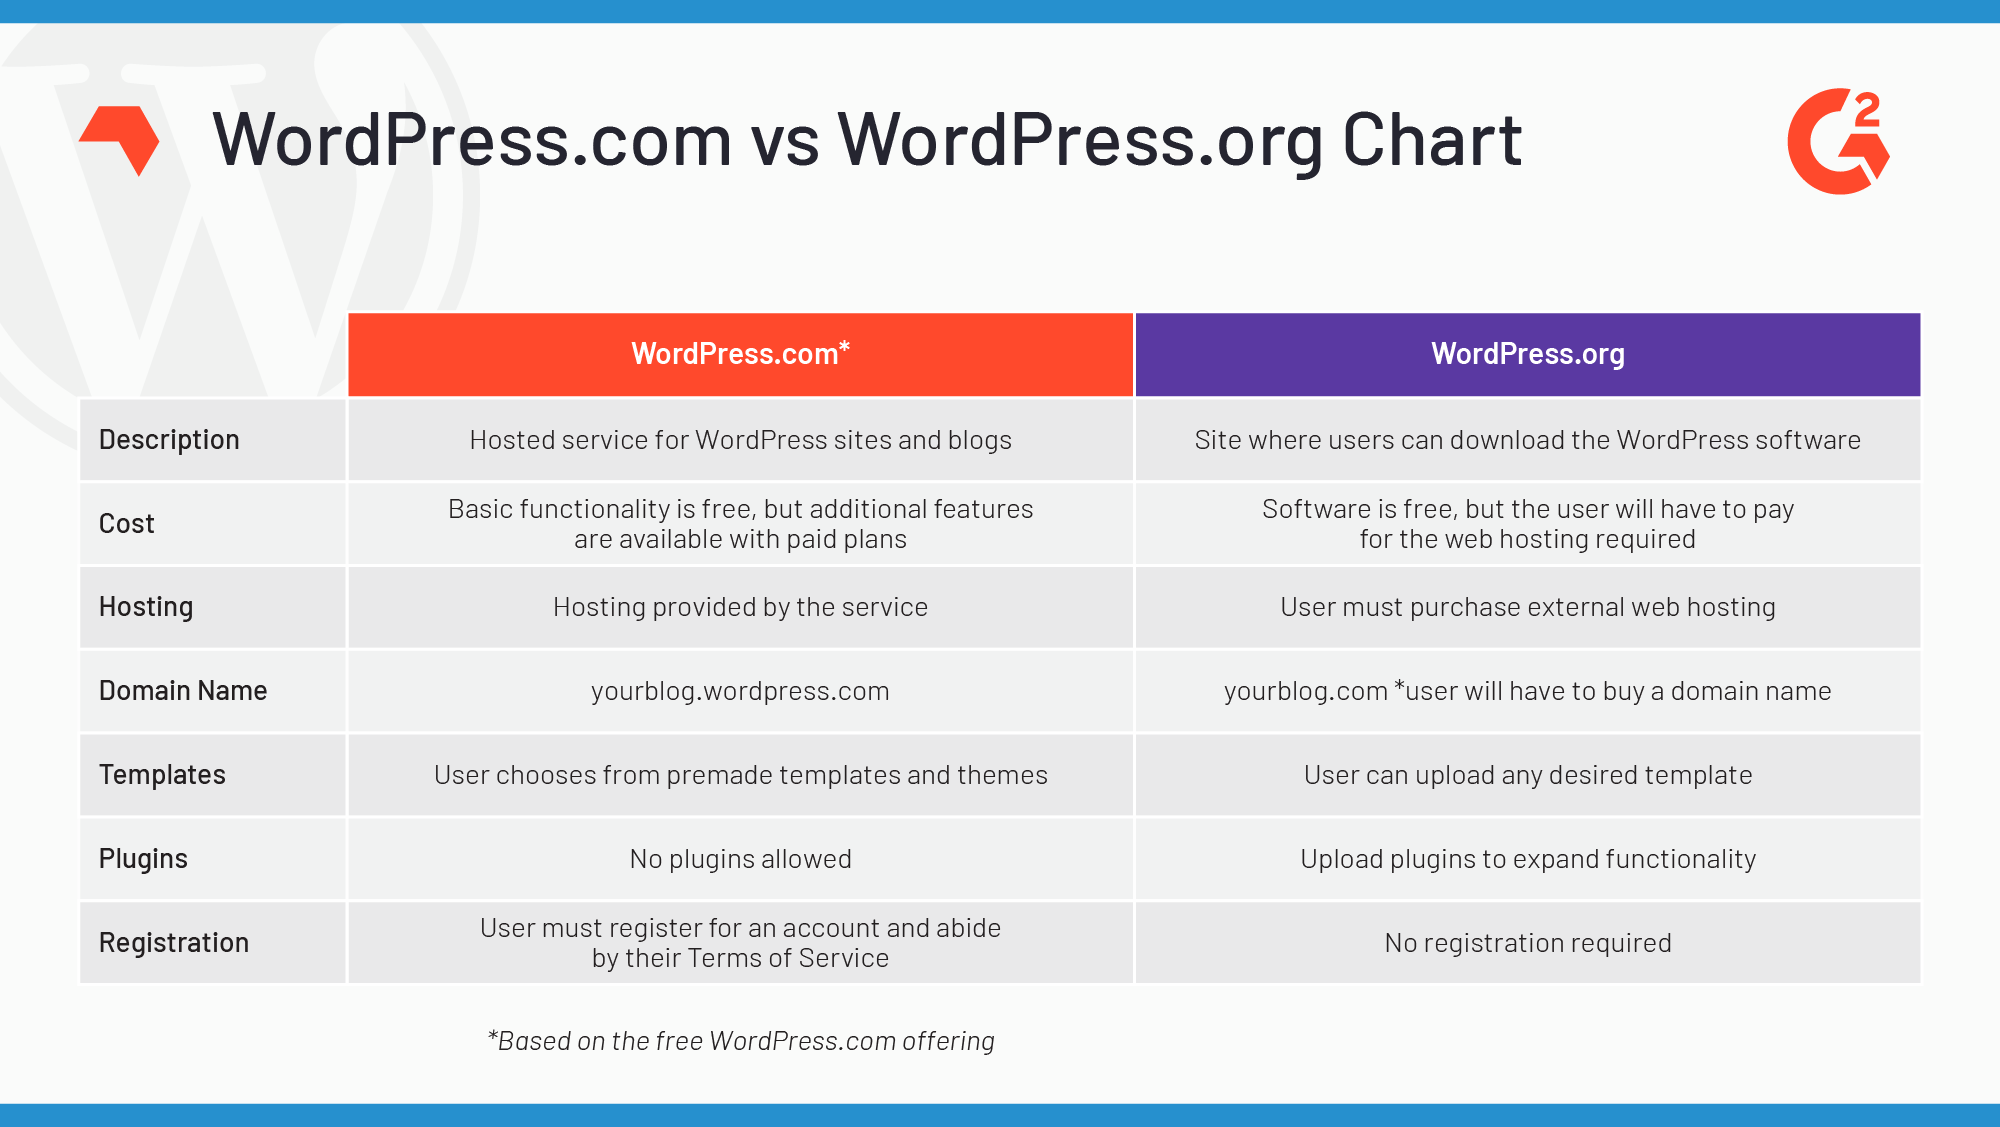 Comparing the features of WordPress.com vs. WordPress.org.